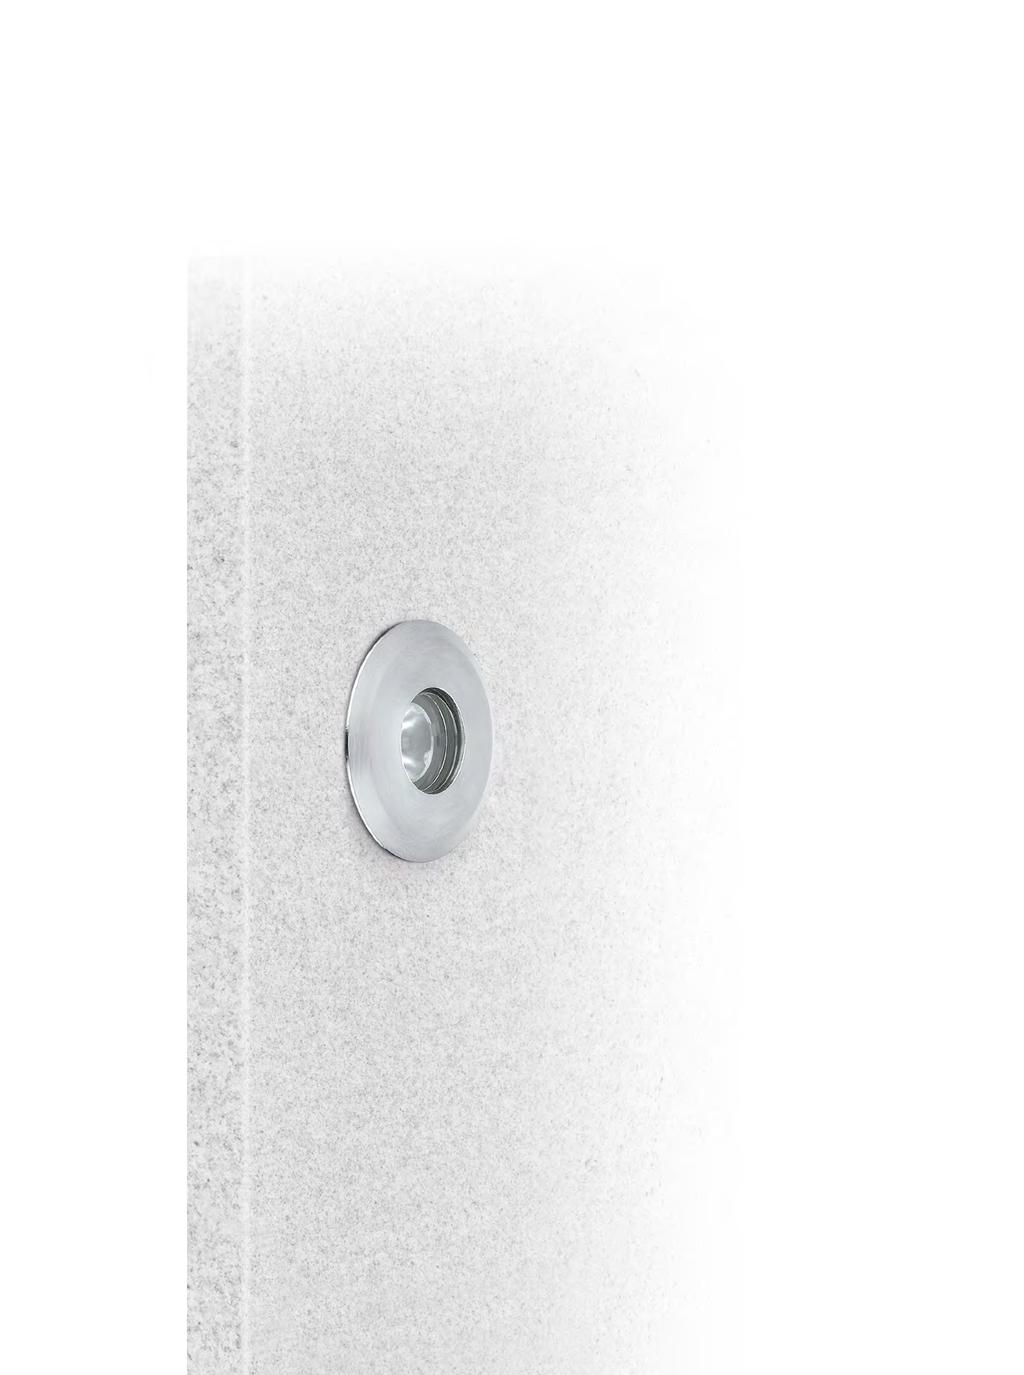 Incassi a parete - Recessed wall-mounted